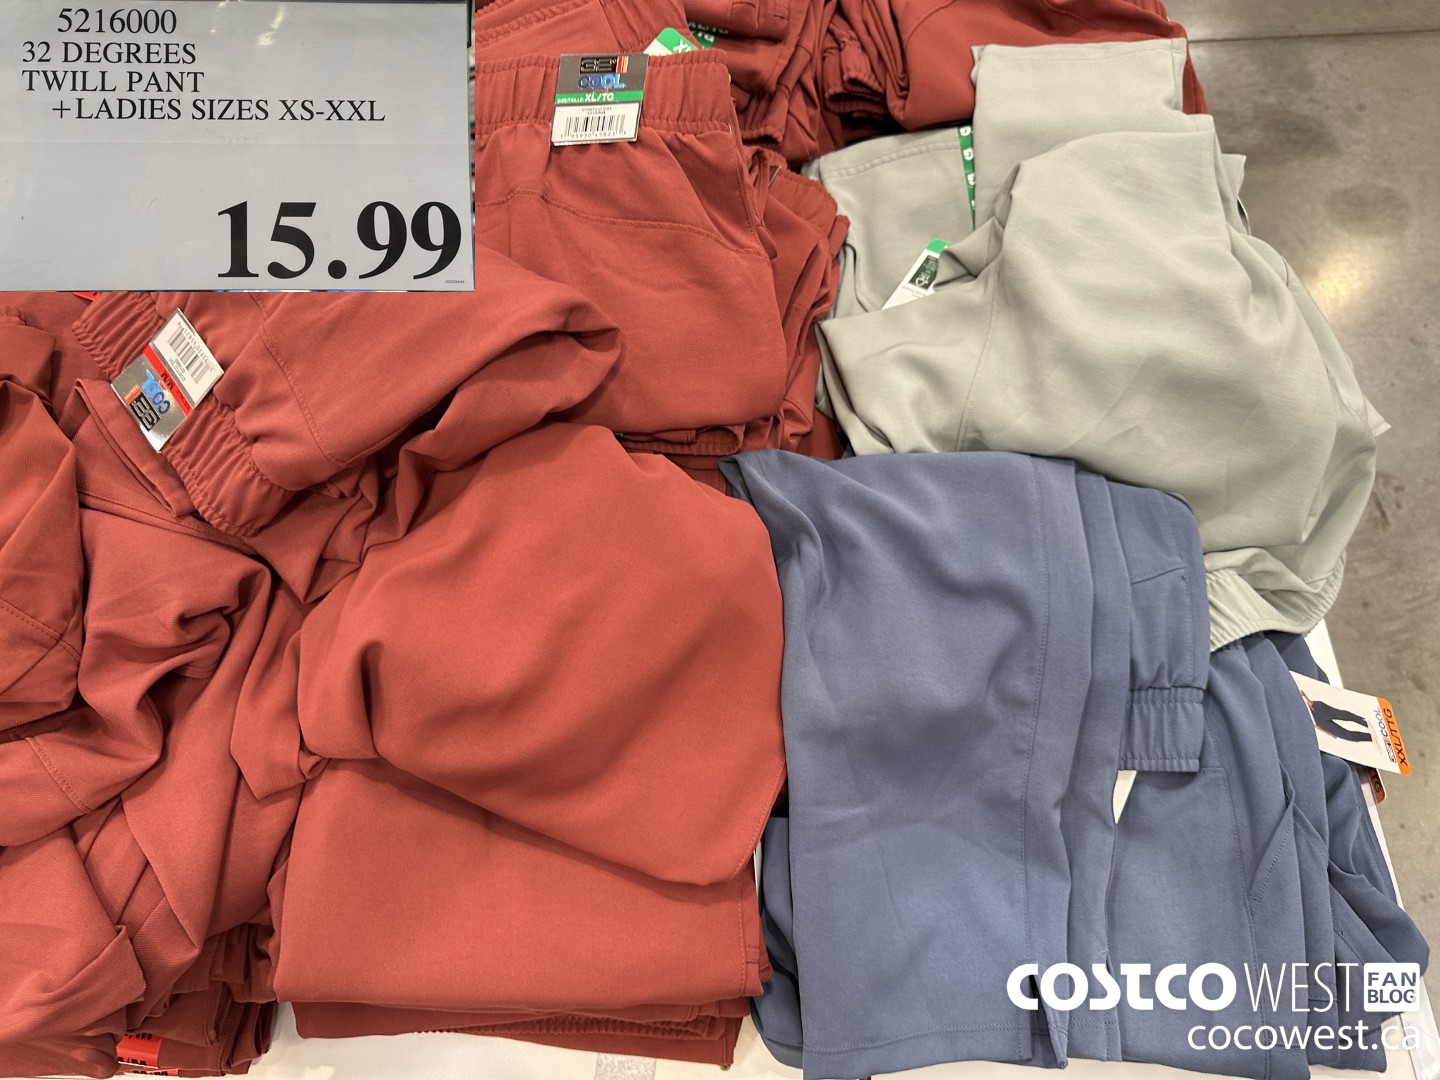 3103024 PARASUCO TWILL PANT LADIES SIZES 4 18 12 97 - Costco East Fan Blog